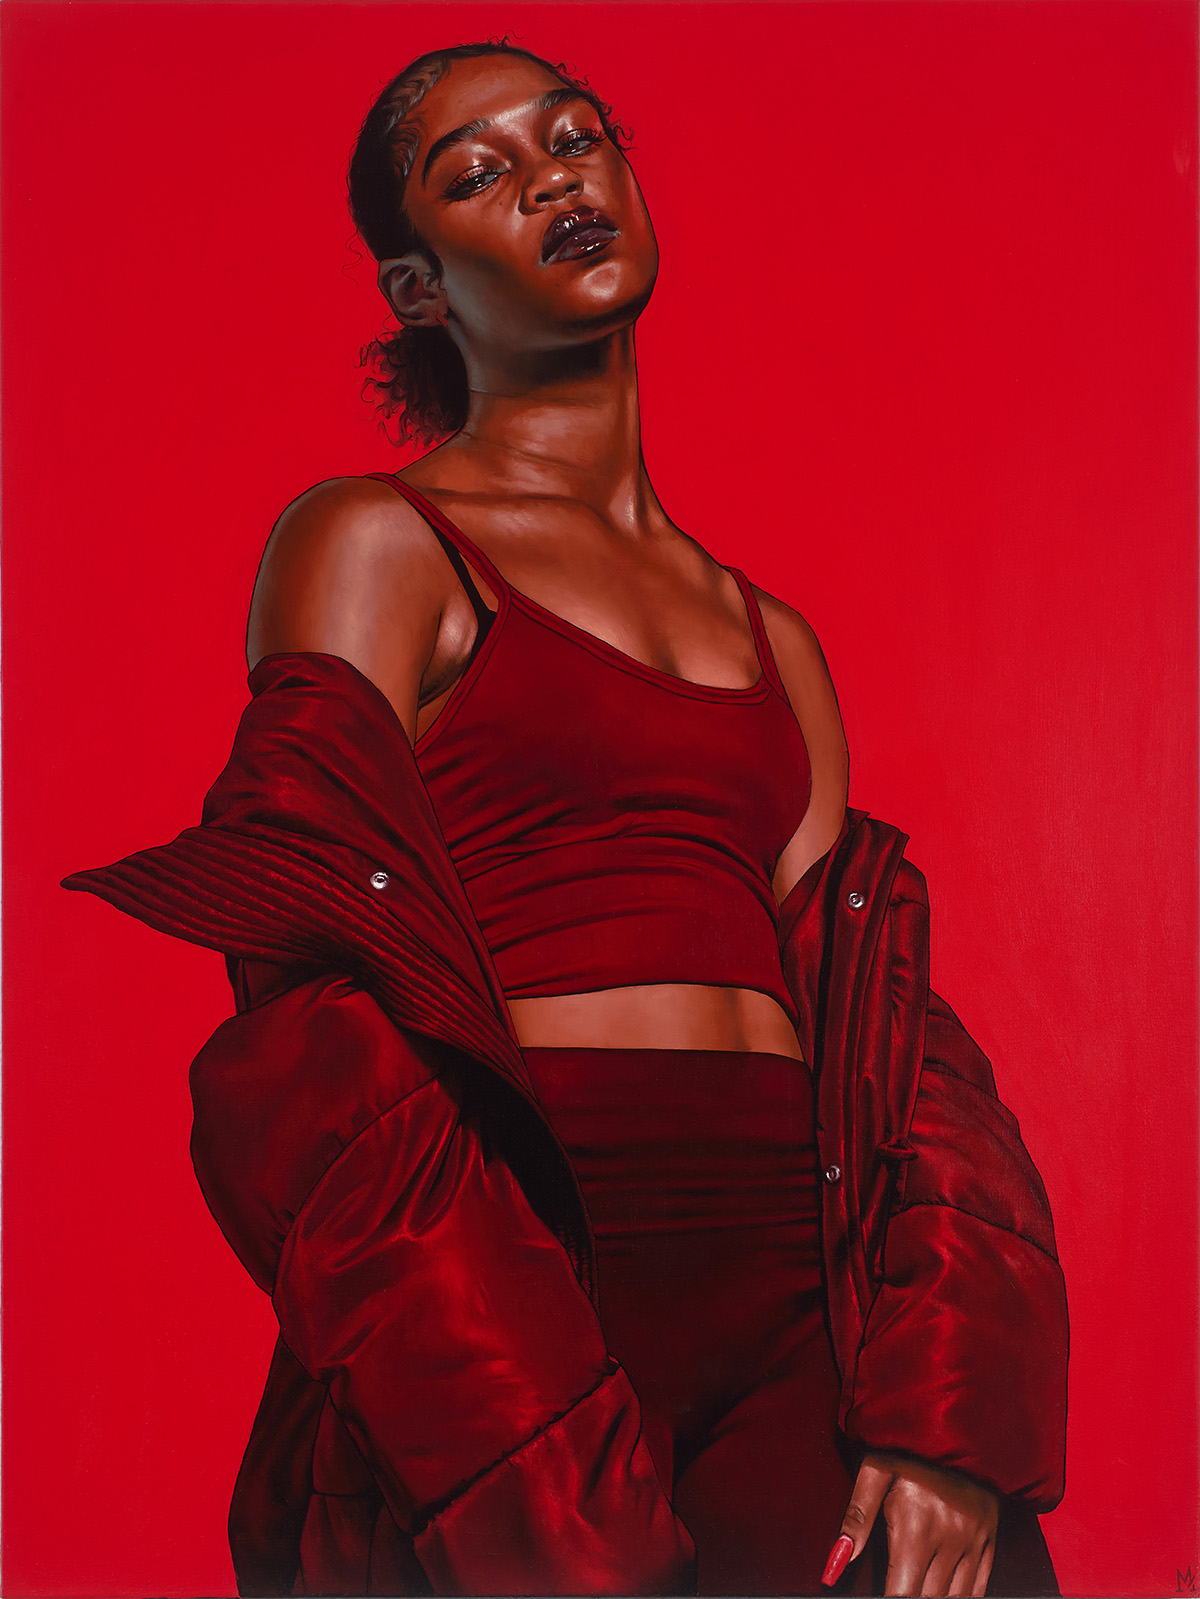 One of two paintings featuring a Black woman wearing an oversized parka. In one image, the parka is open and in the other it is closed. The background of the image and all clothing is red.